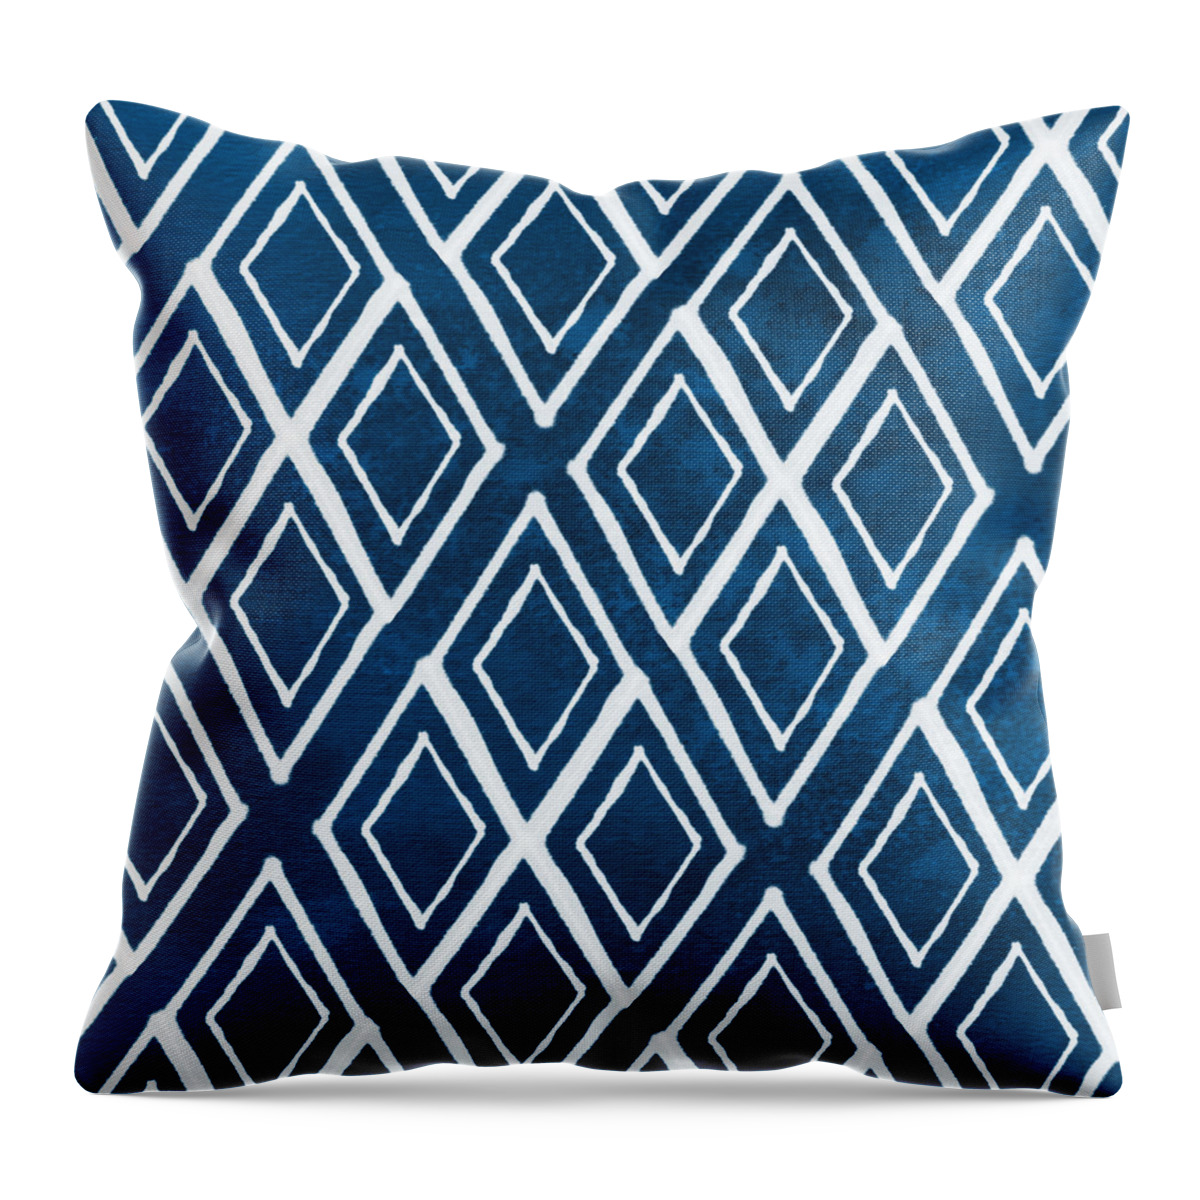 Indigo And White Throw Pillow featuring the painting Indgo and White Diamonds Large by Linda Woods